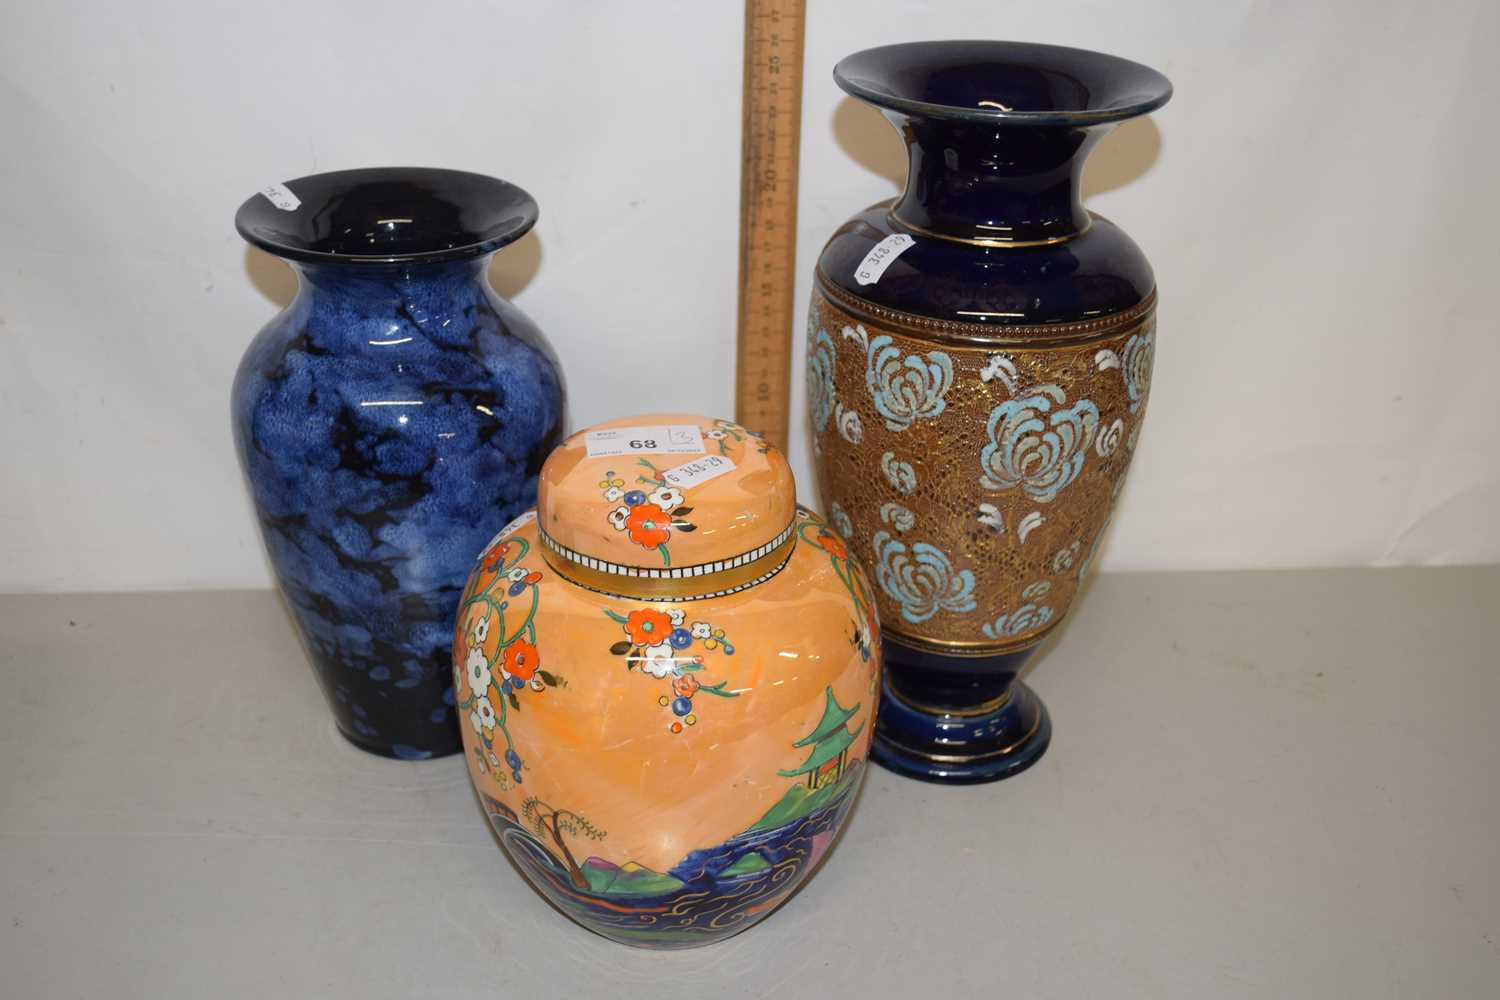 Mixed Lot: A Ewenny vase together with a Doulton Slaters vase and a further ginger jar